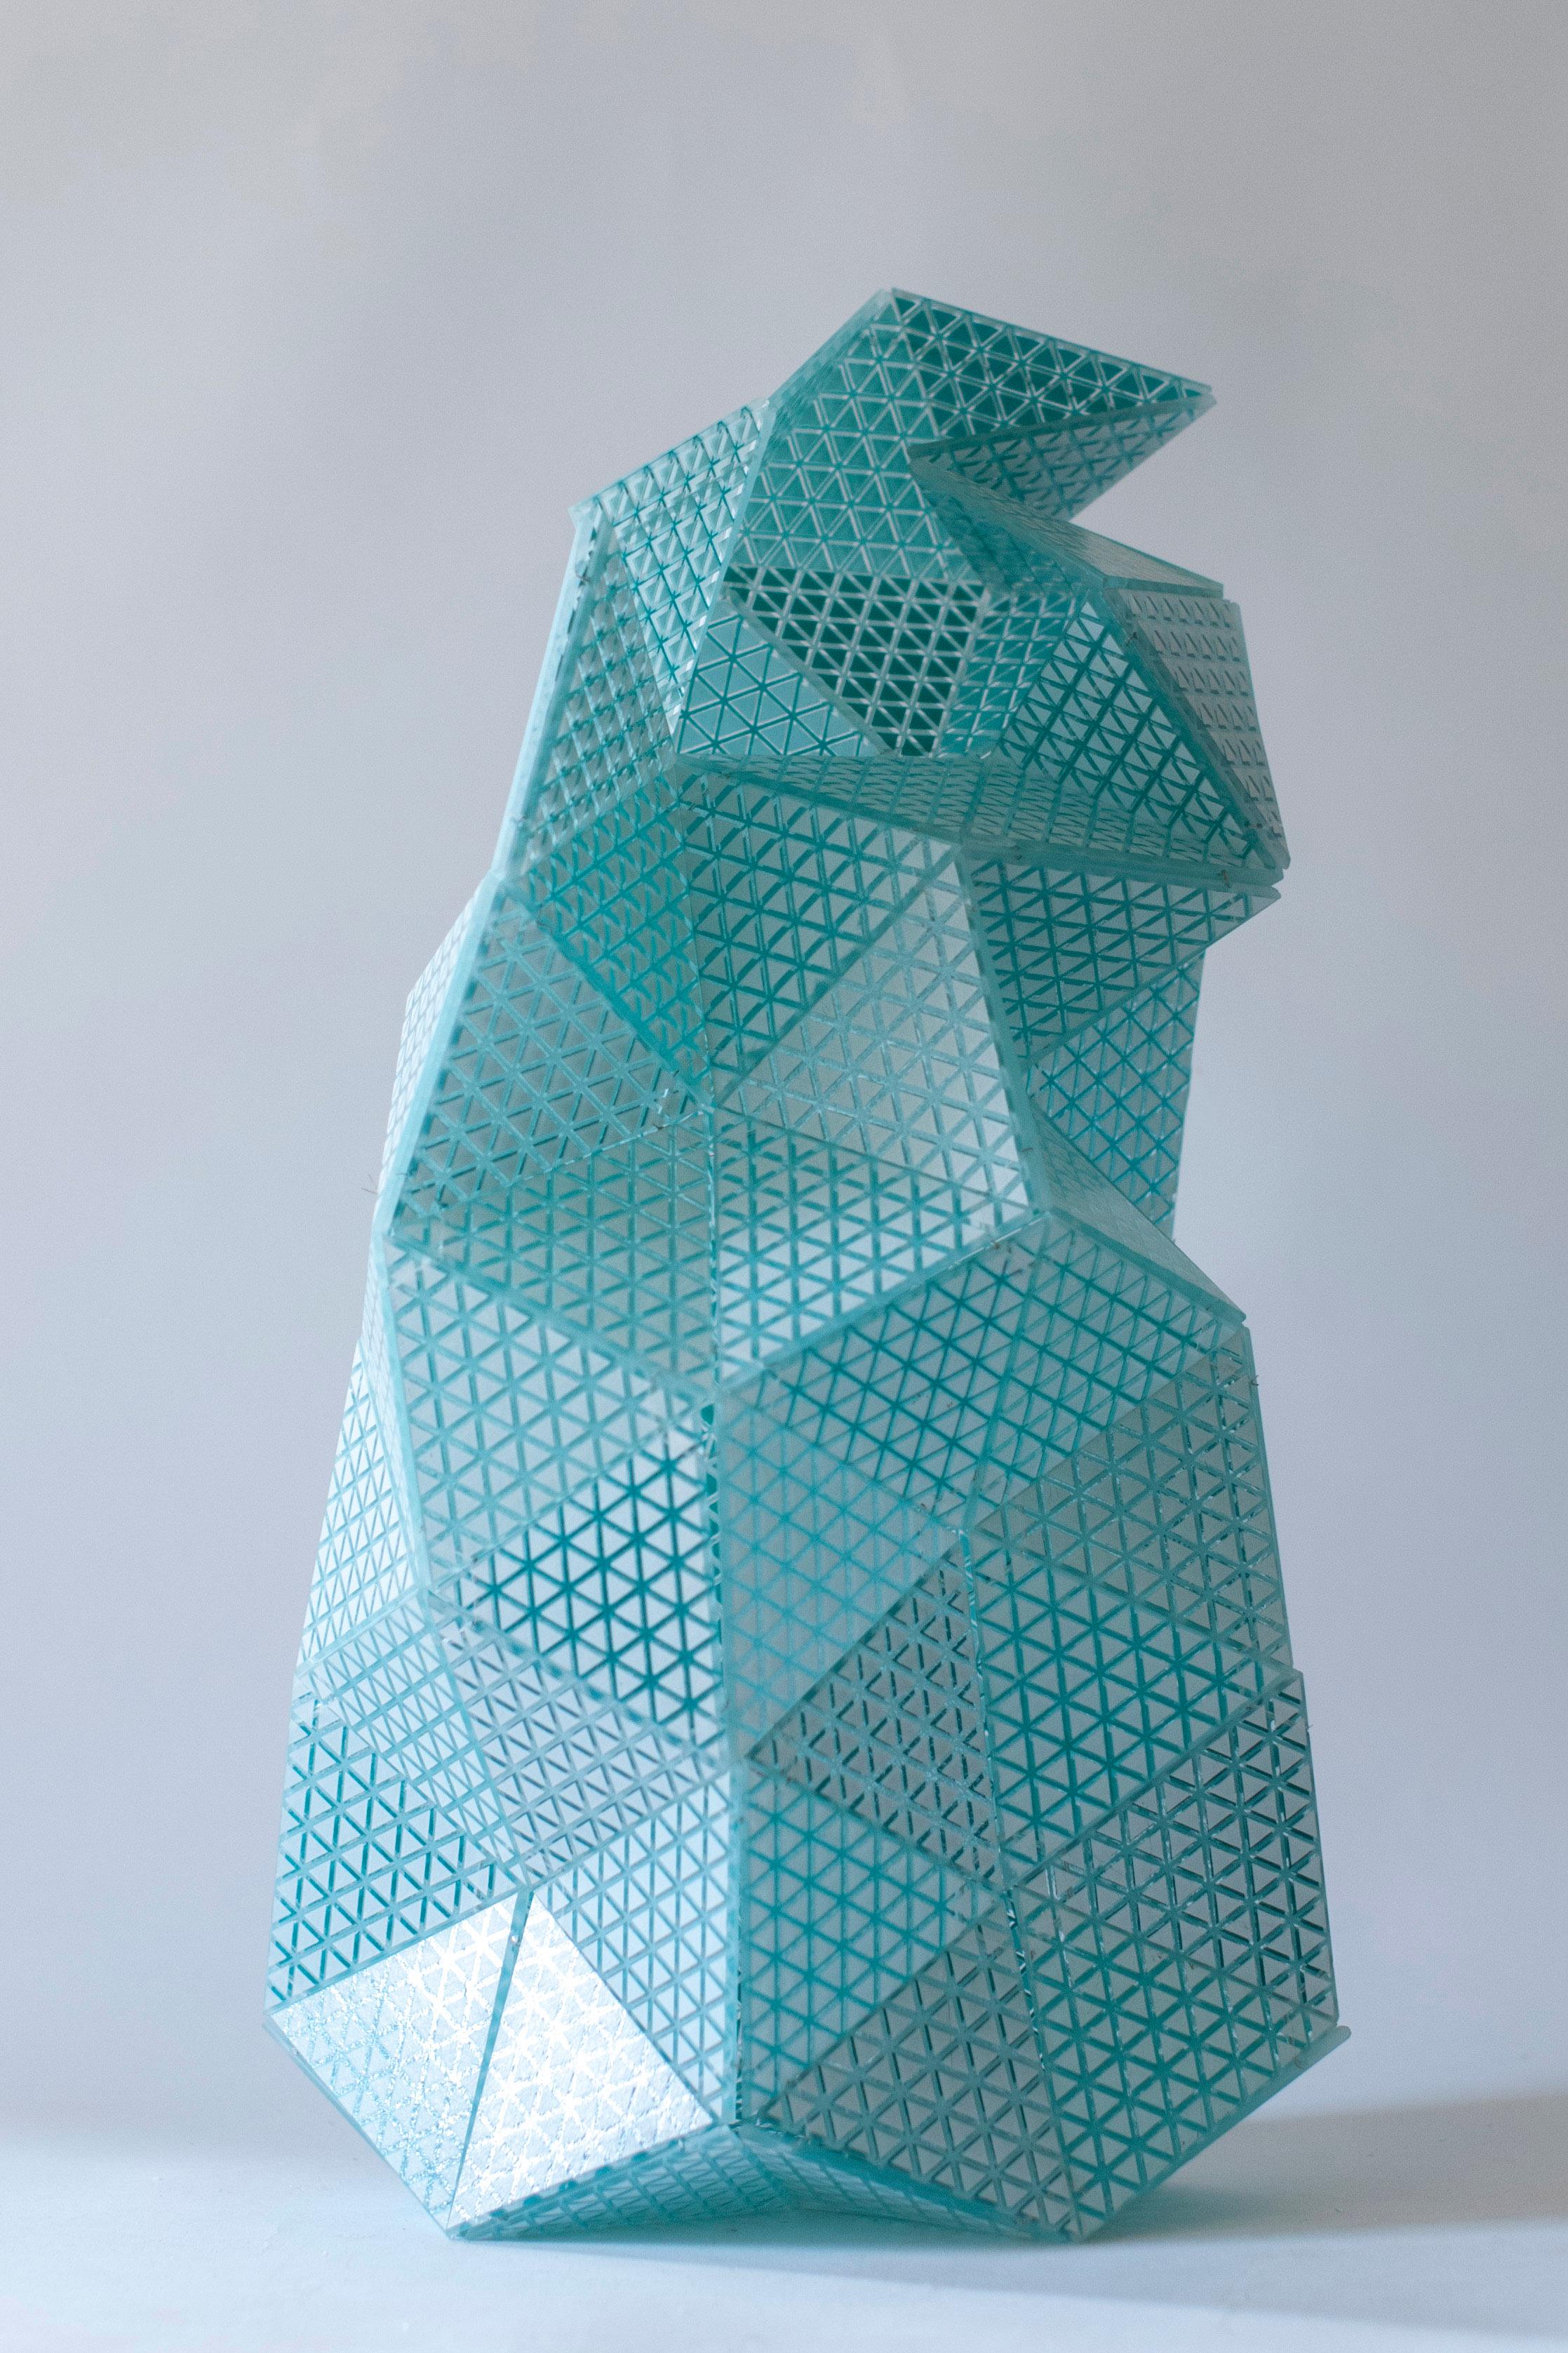 Touch-me 1.0 Murano glass vase by Matteo Silverio, 2019
Dimensions: Approximate 15 x 30 x 50 cm 
Materials: Murano glass

All the objects are 100% handmade and customizable (colors, patterns, size)
The composition can be easily transformed into